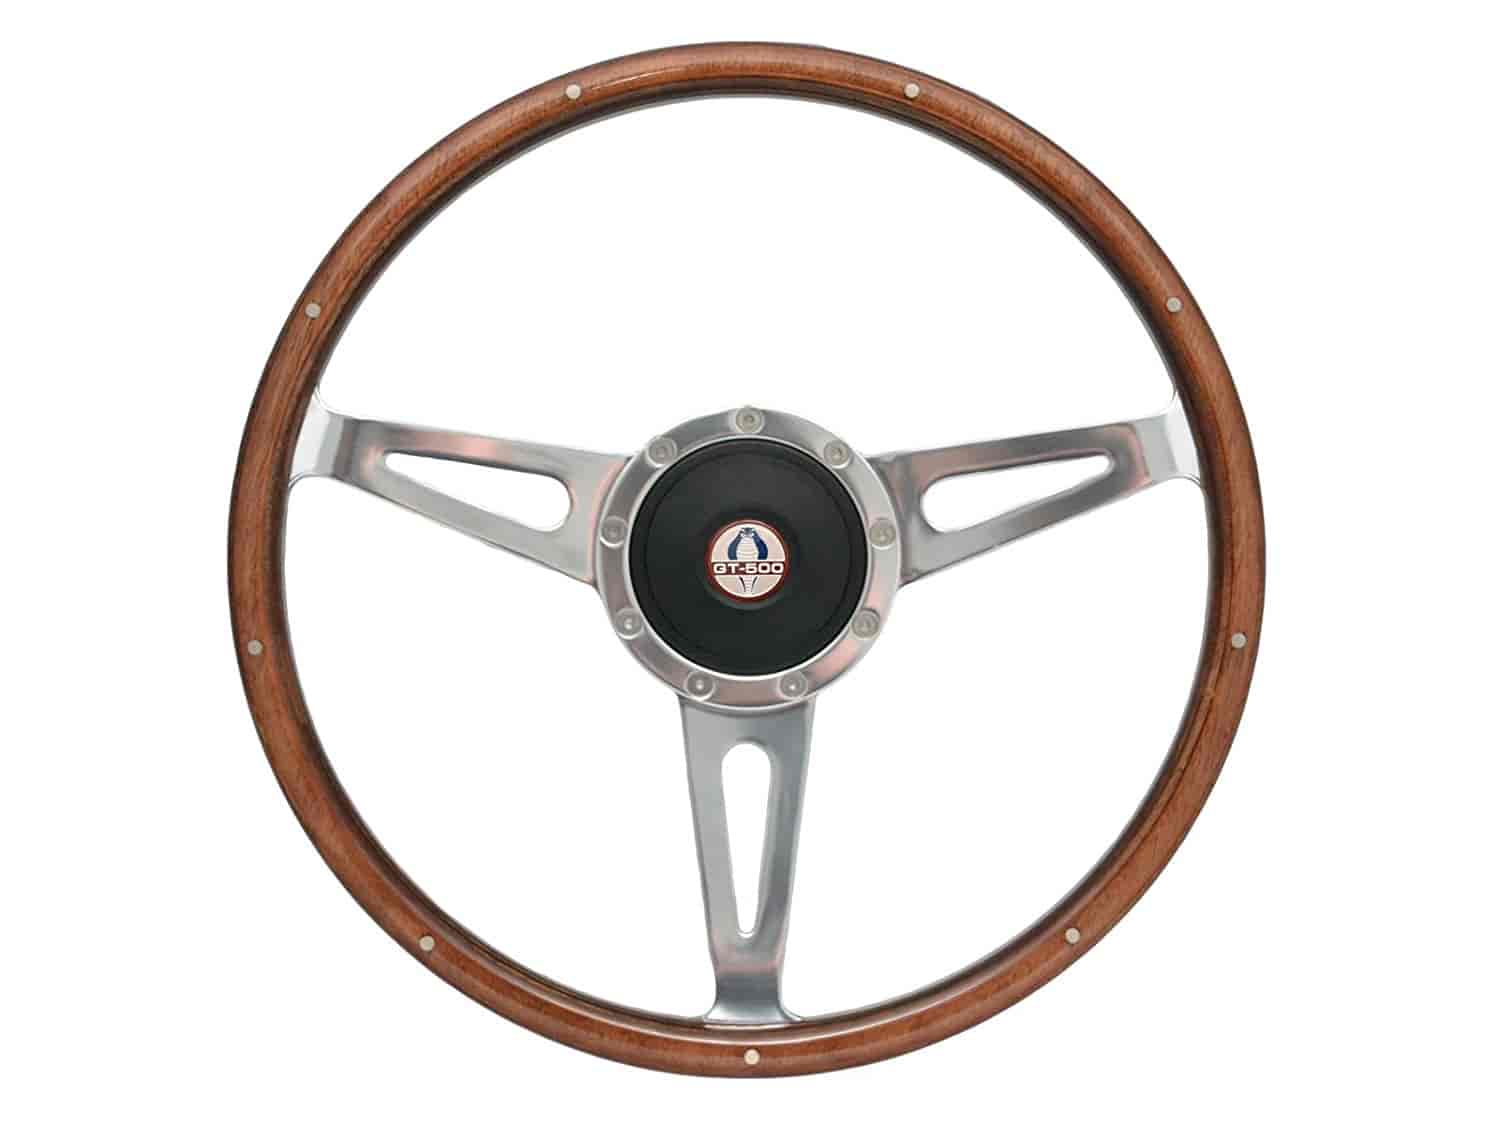 S9 Classic Steering Wheel Kit for 1968-1991 Ford/Mercury, 15 in. Diameter, Walnut Wood Grip, with 9-Bolt Adapter & Horn Button